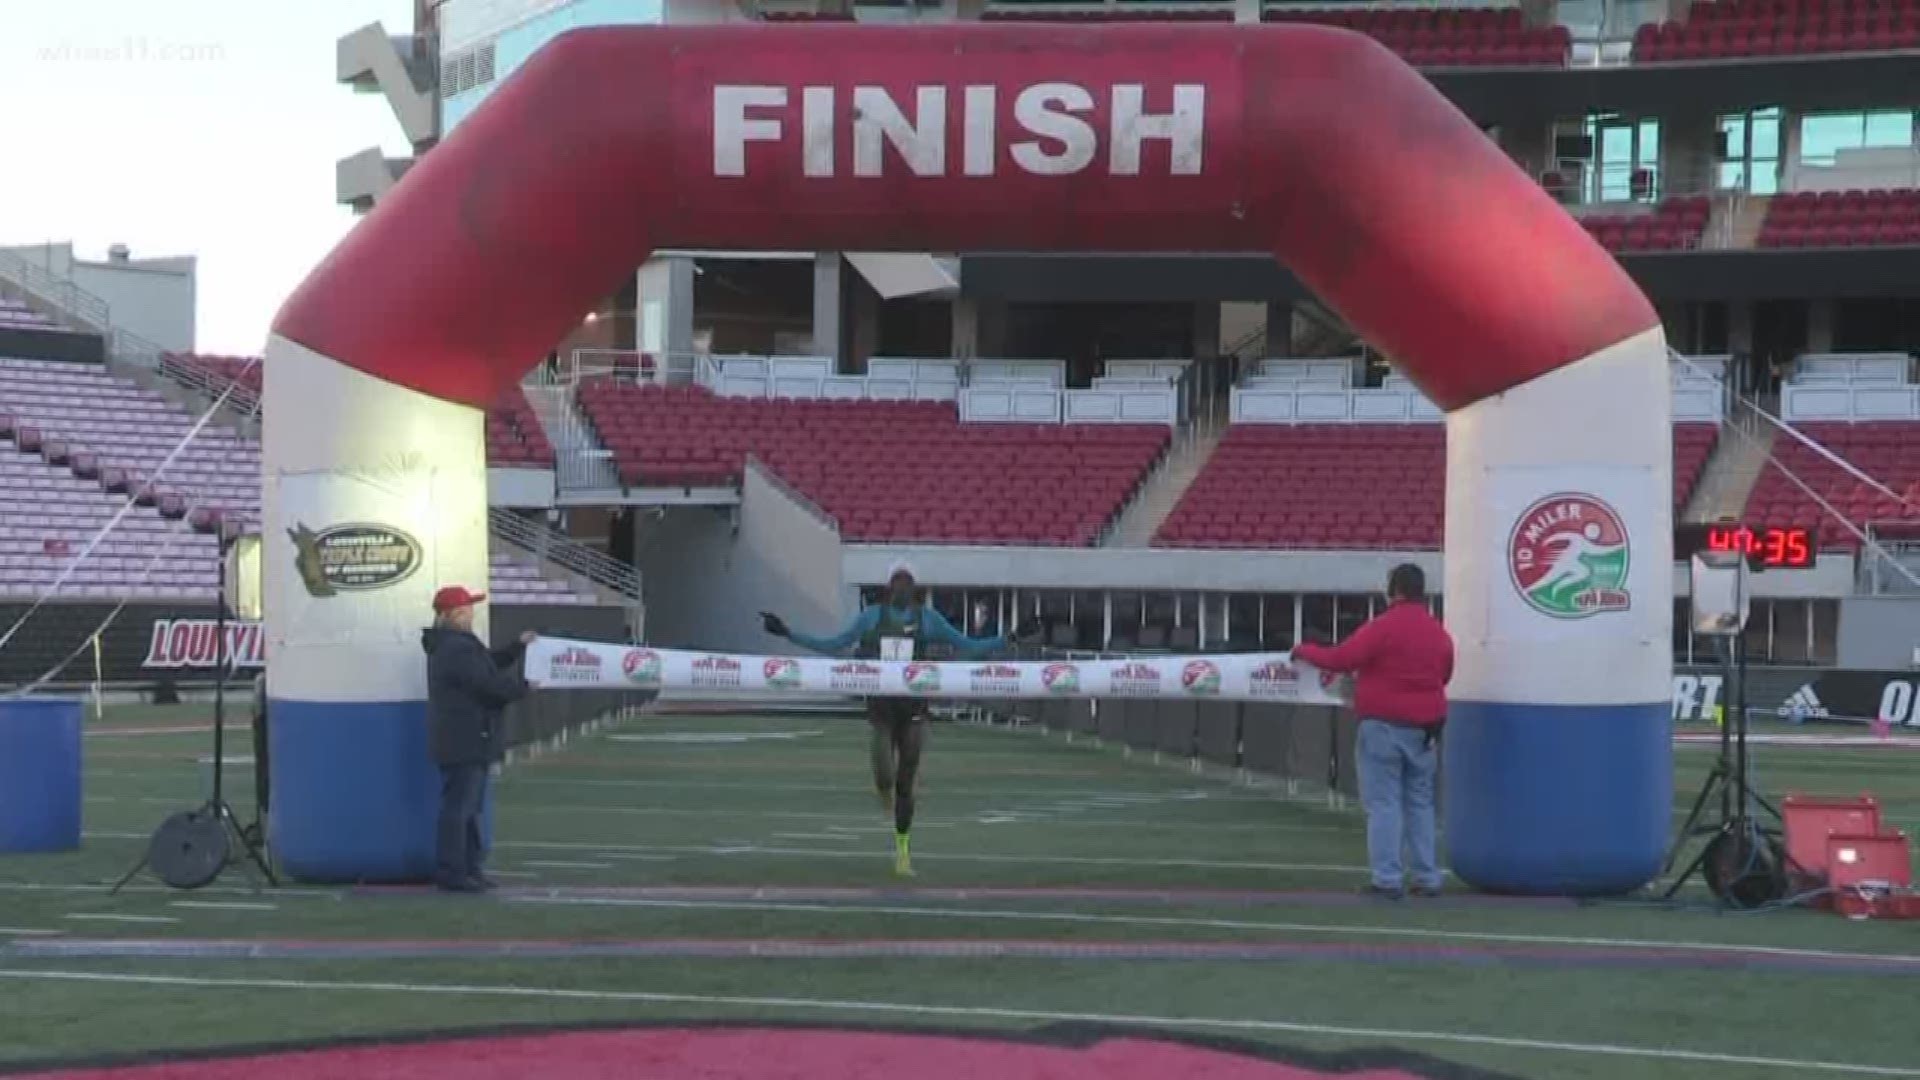 After 35 years the Louisville Triple Crown of running is ending.